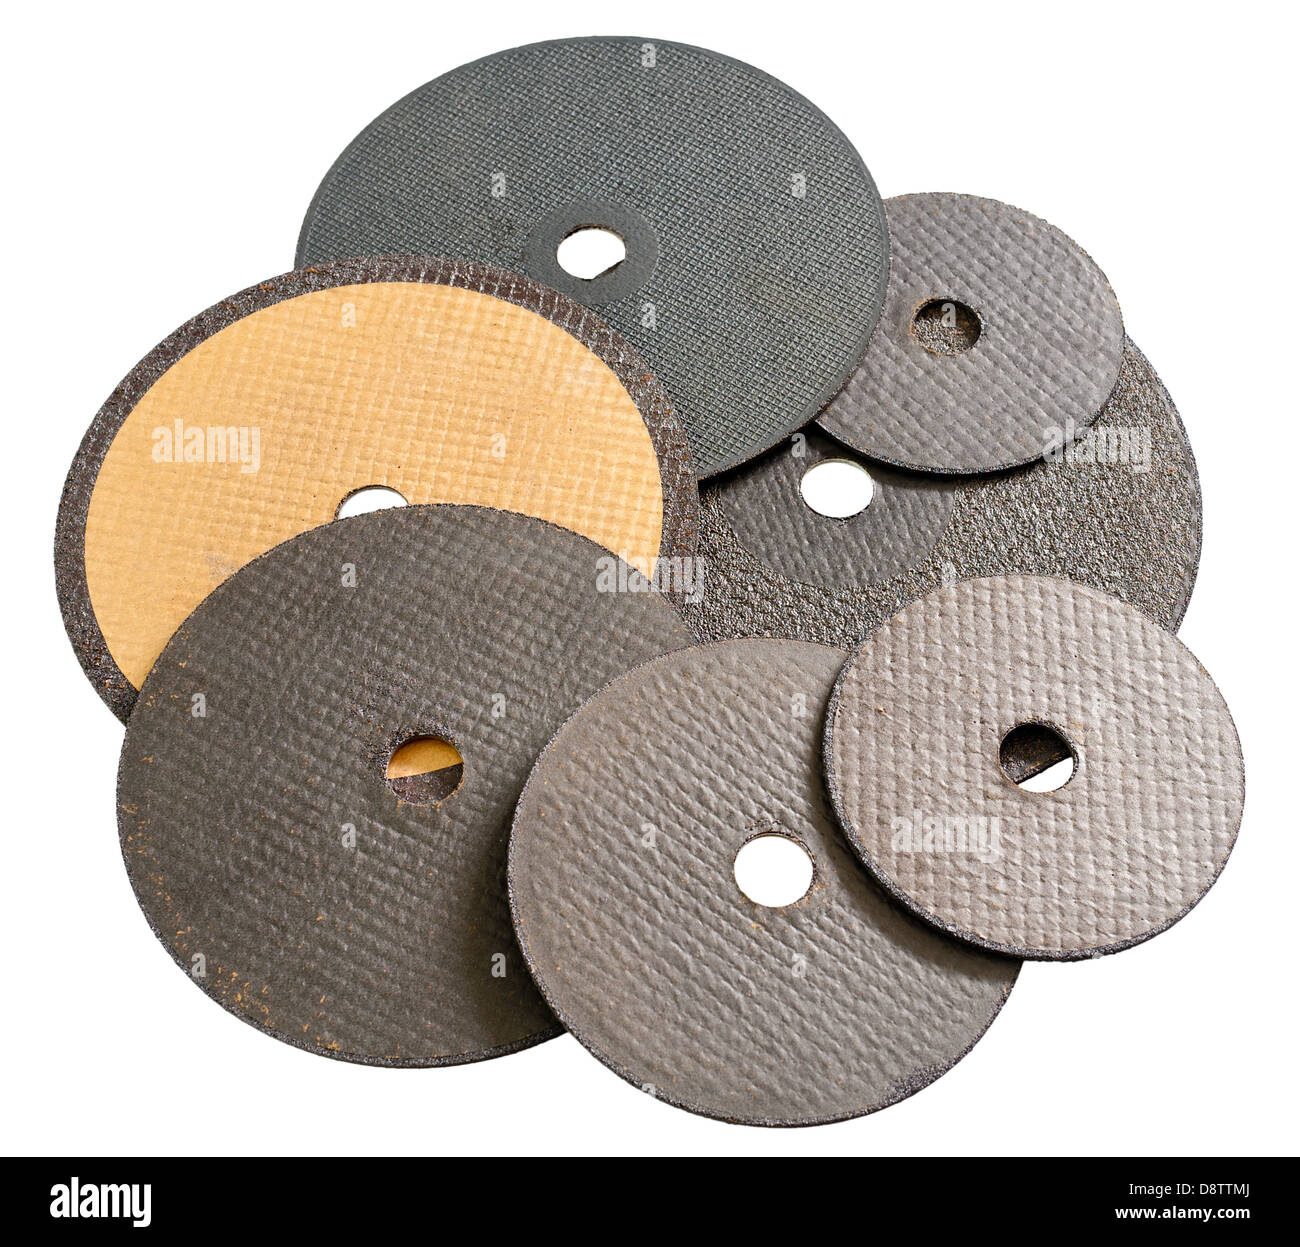 abrasive disks for metal cutting Stock Photo